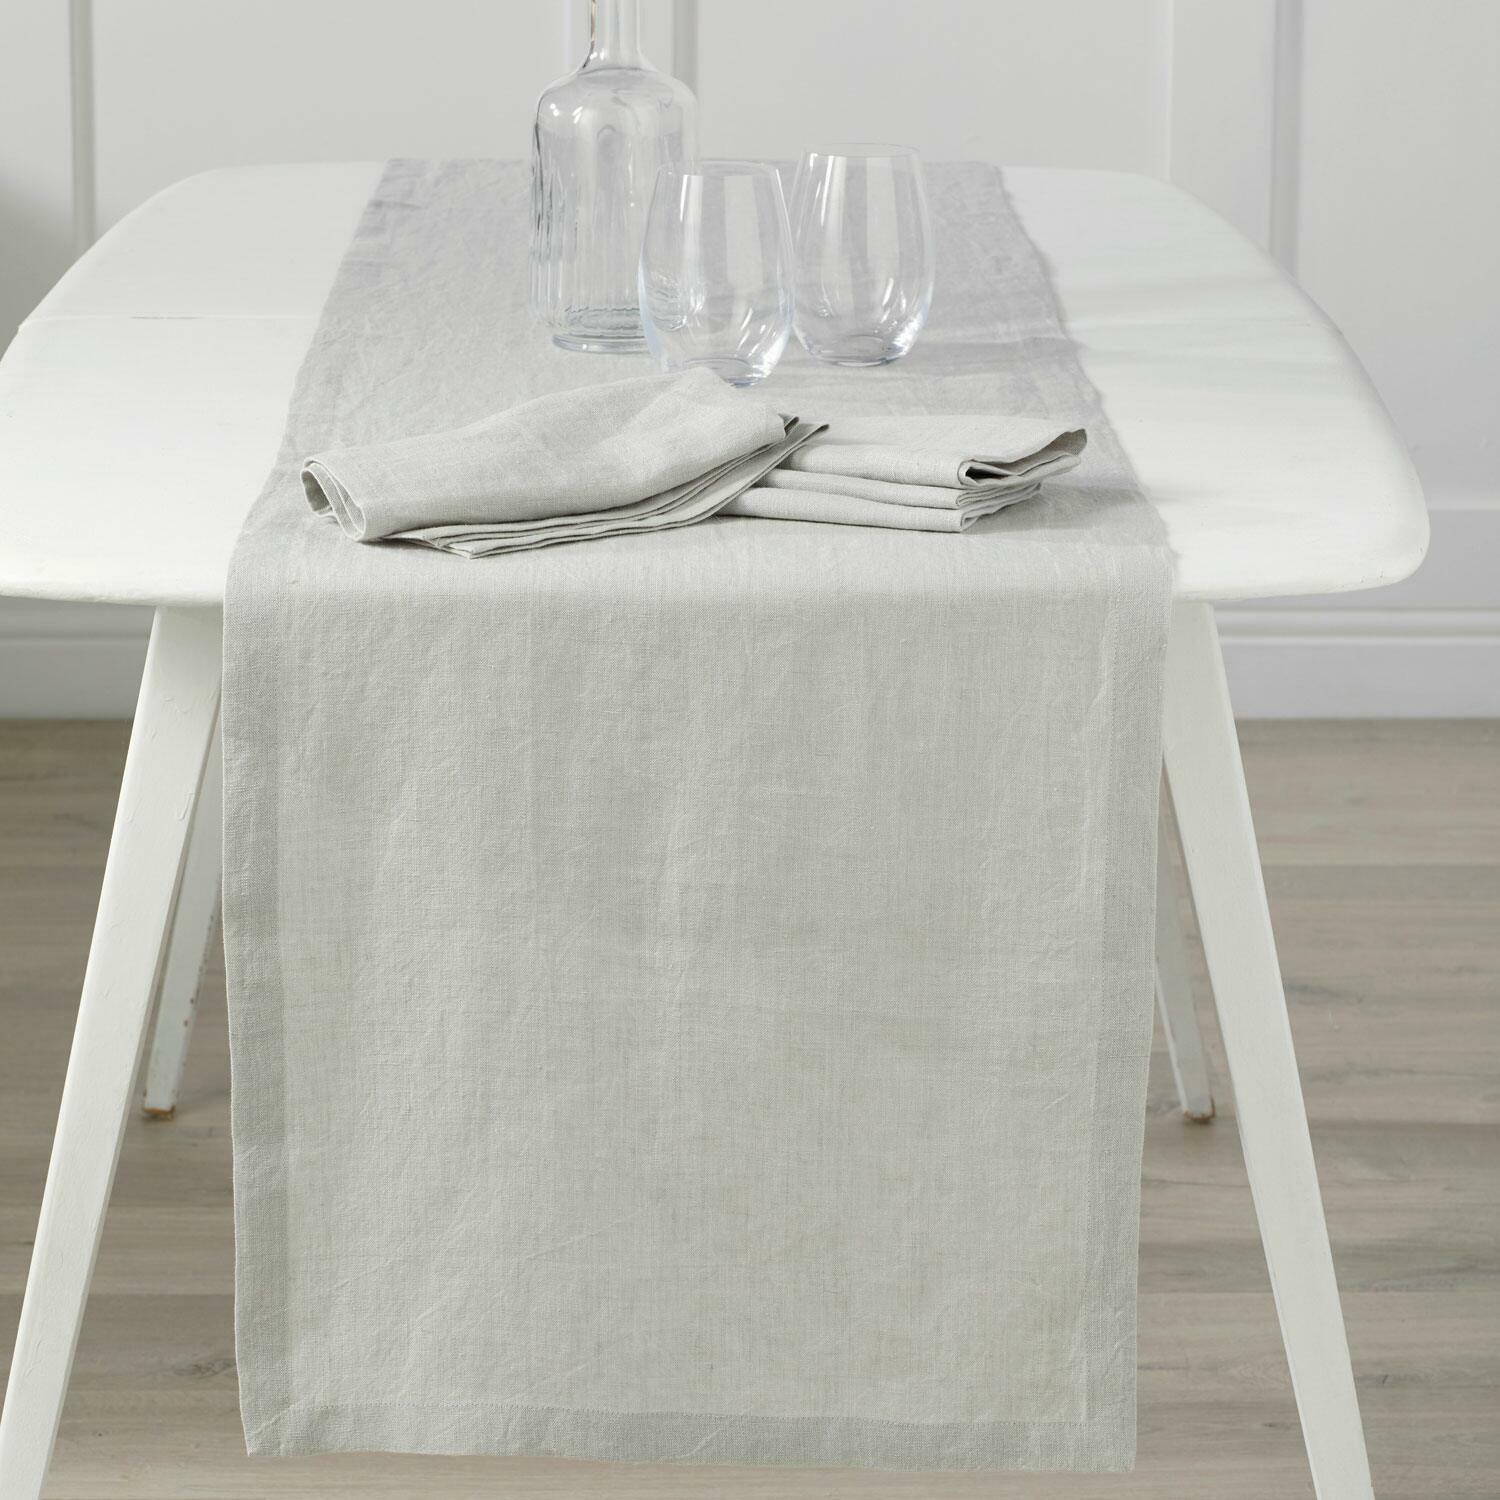 Read more about Graham and green pale grey linen table runner